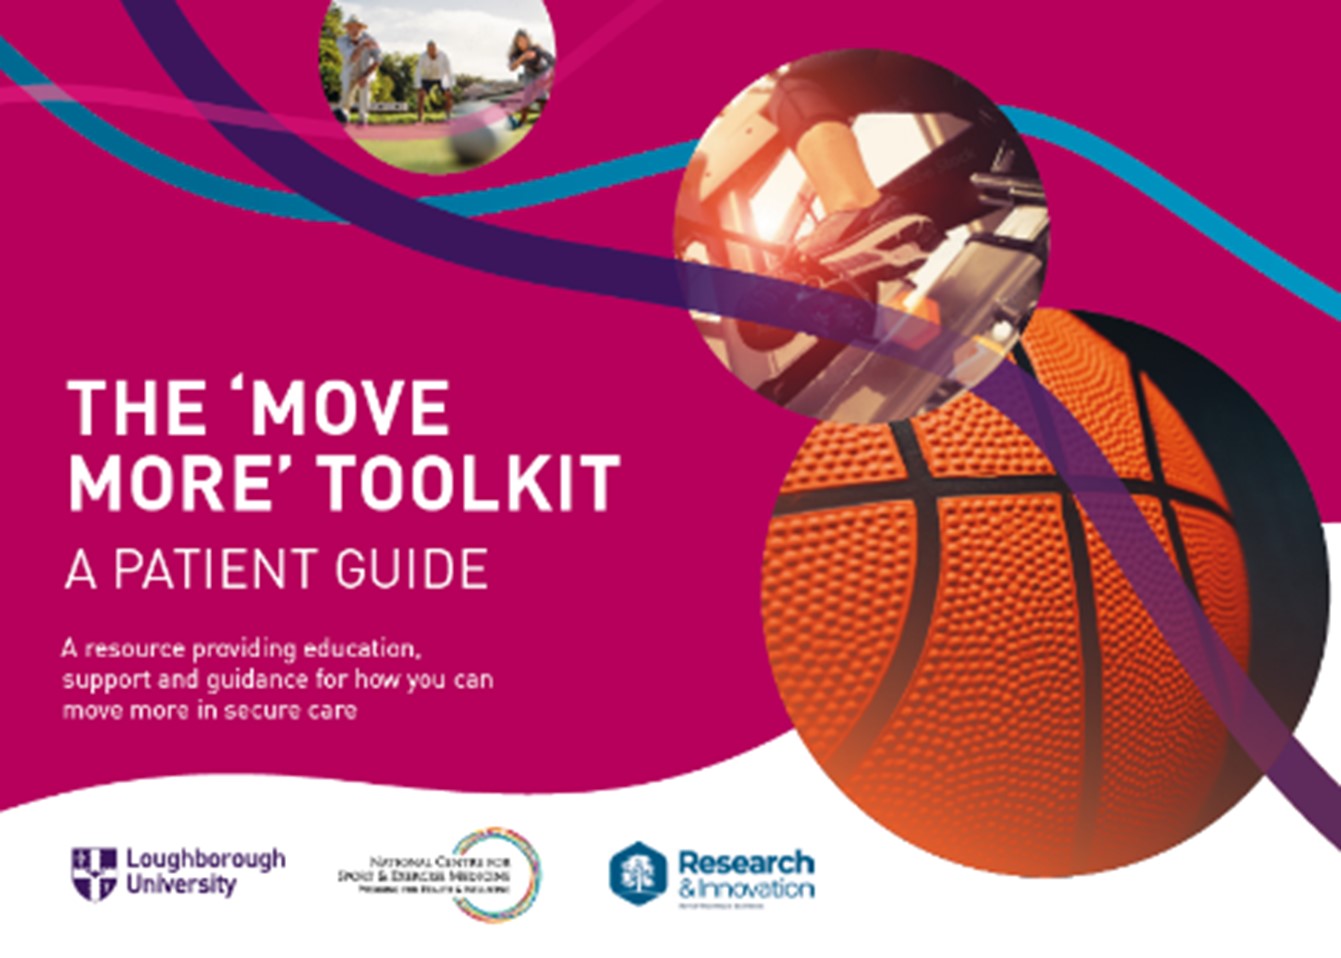 The front cover of the Move More toolkit (for patients). It is pink with an image of a basketball on it and the words 